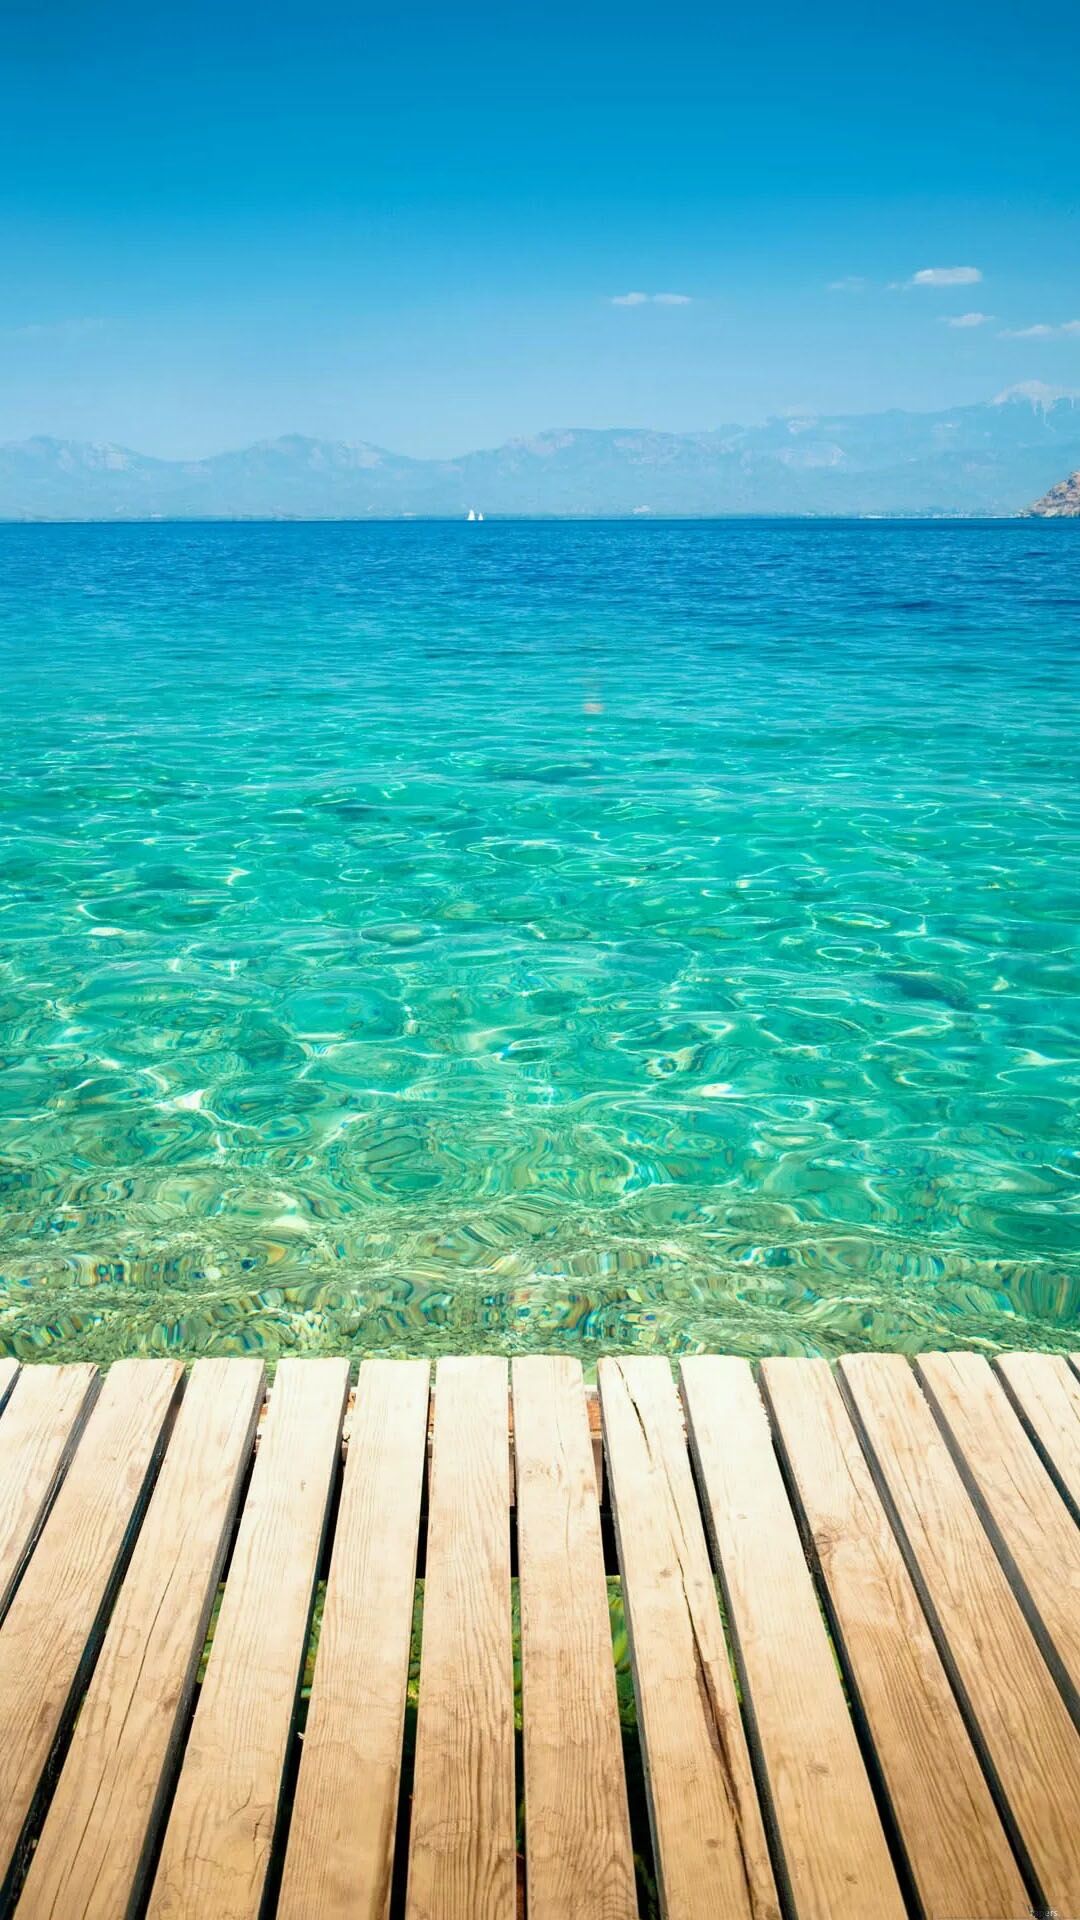 Wooden Dock Transparent Sea Water Android Wallpaper free download